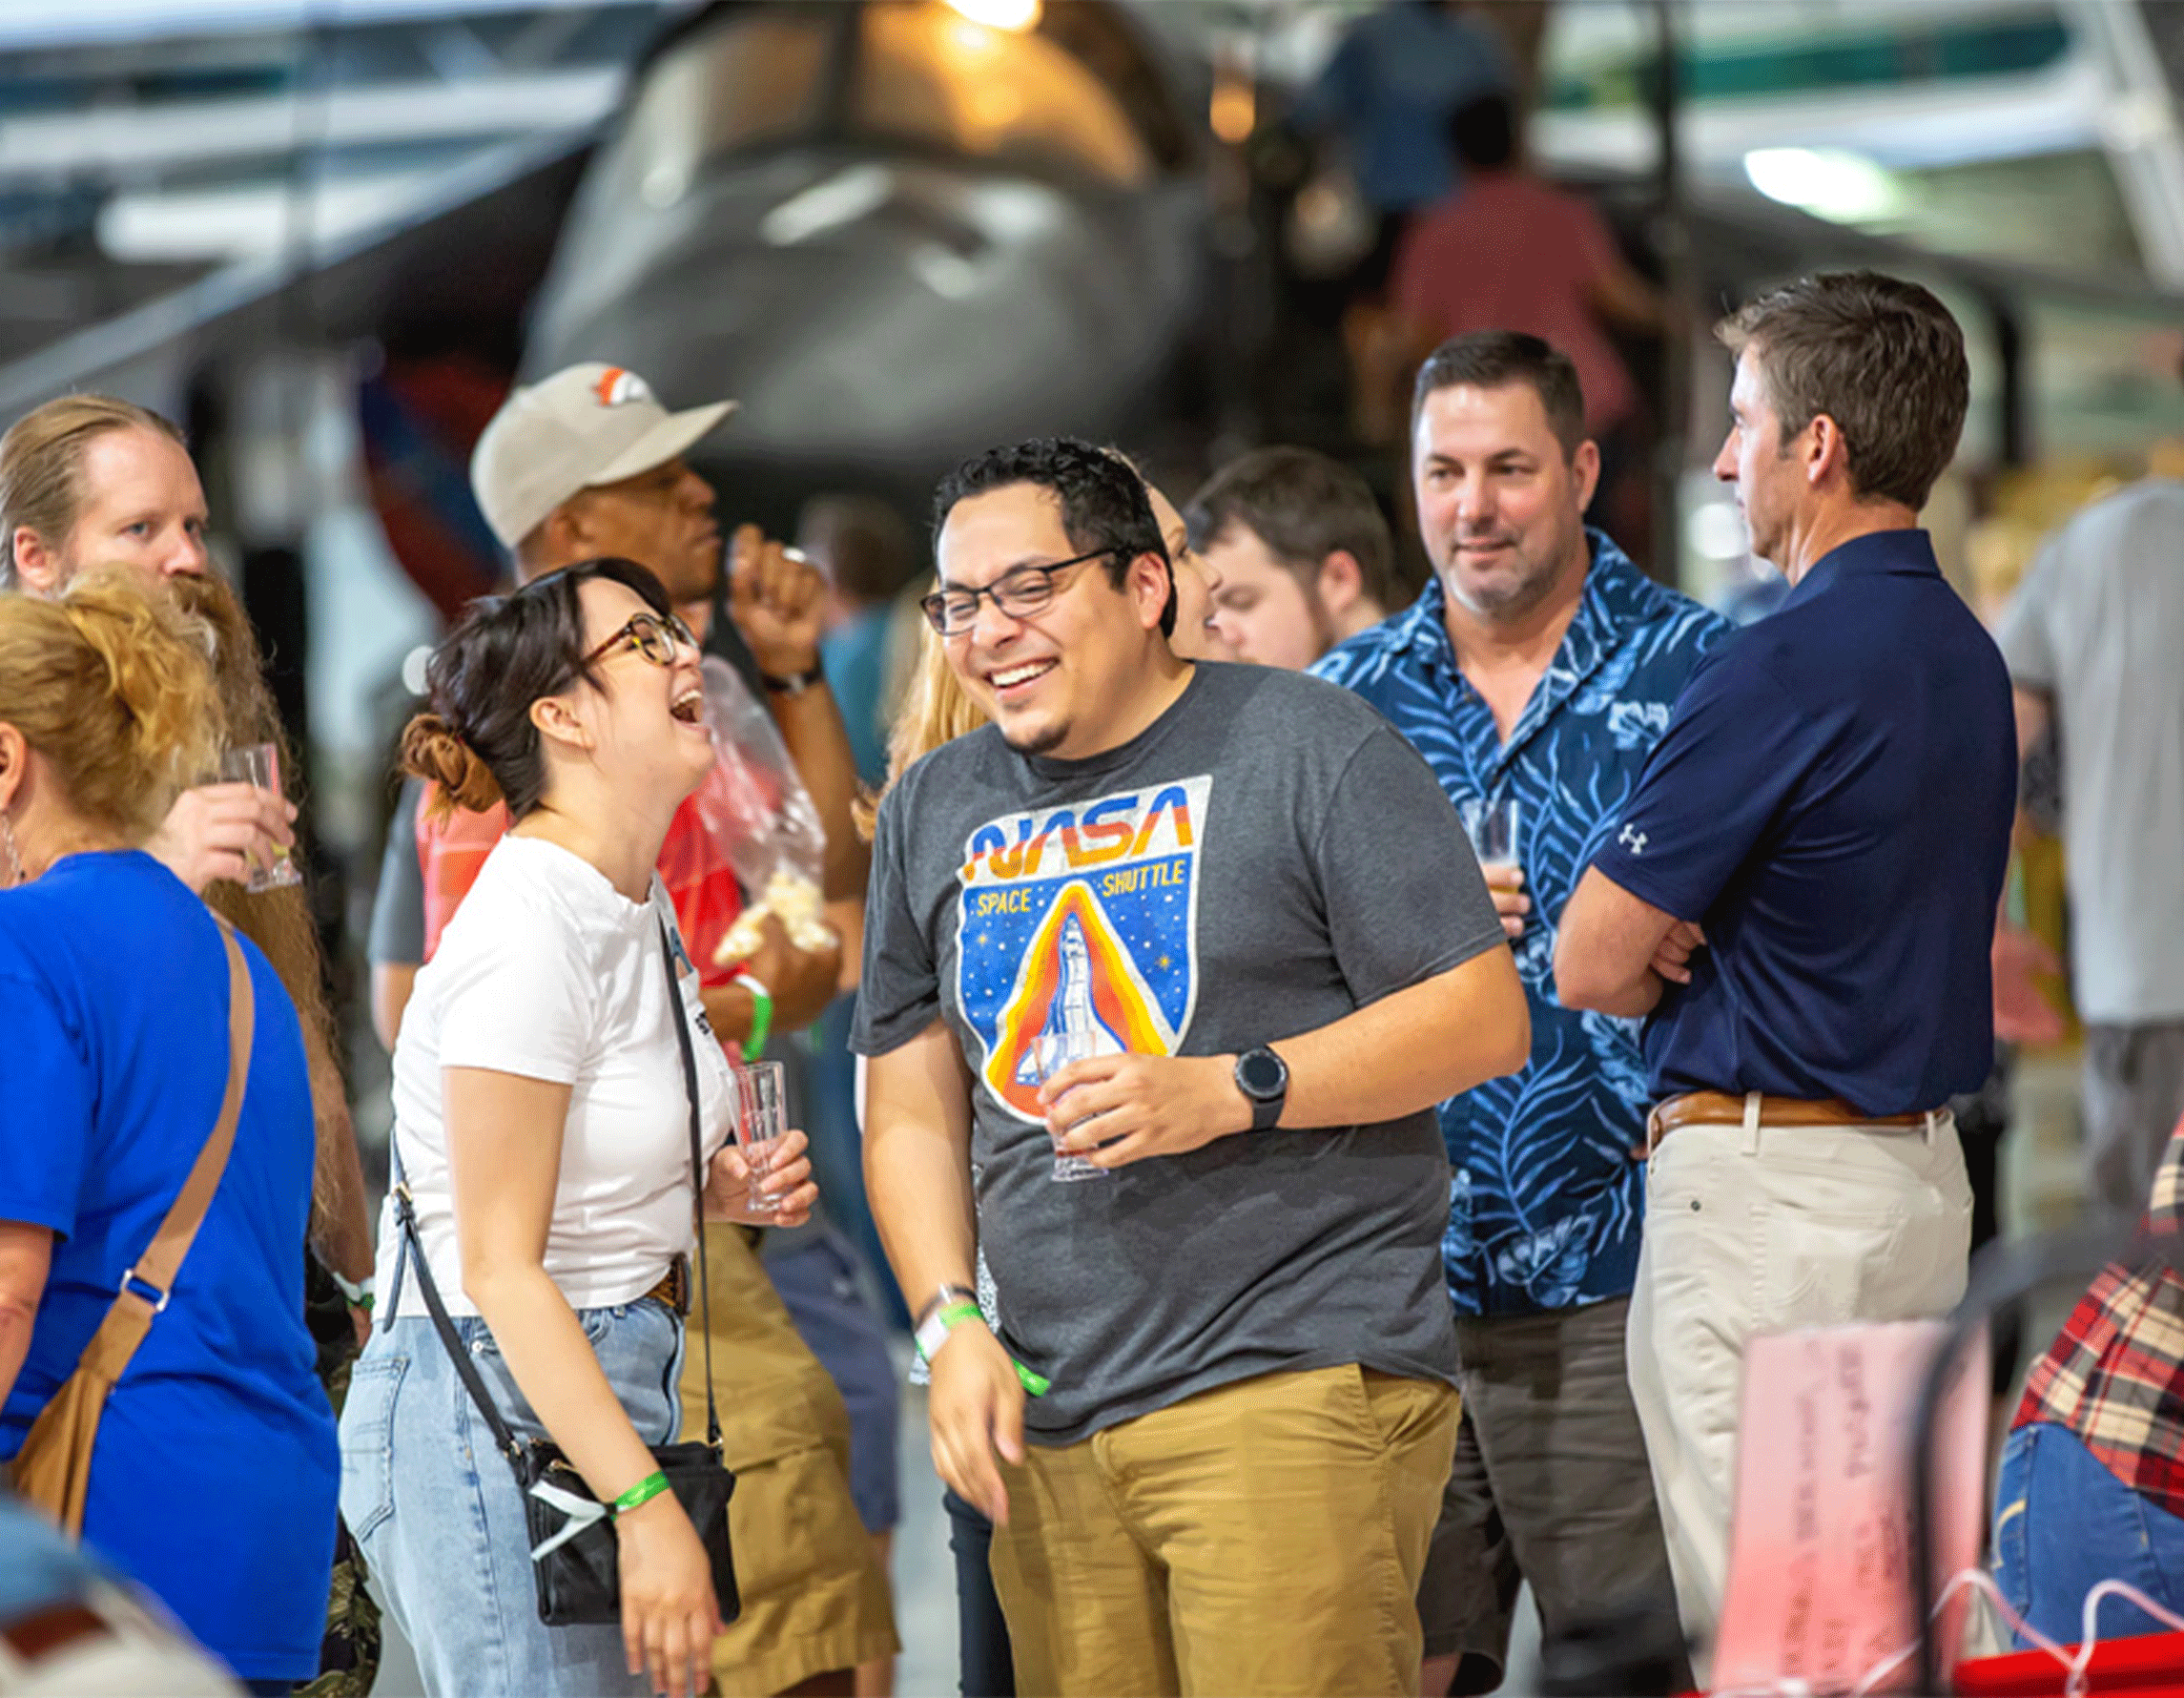 Young couple holding drinks and laughing at the Air & Space Museum